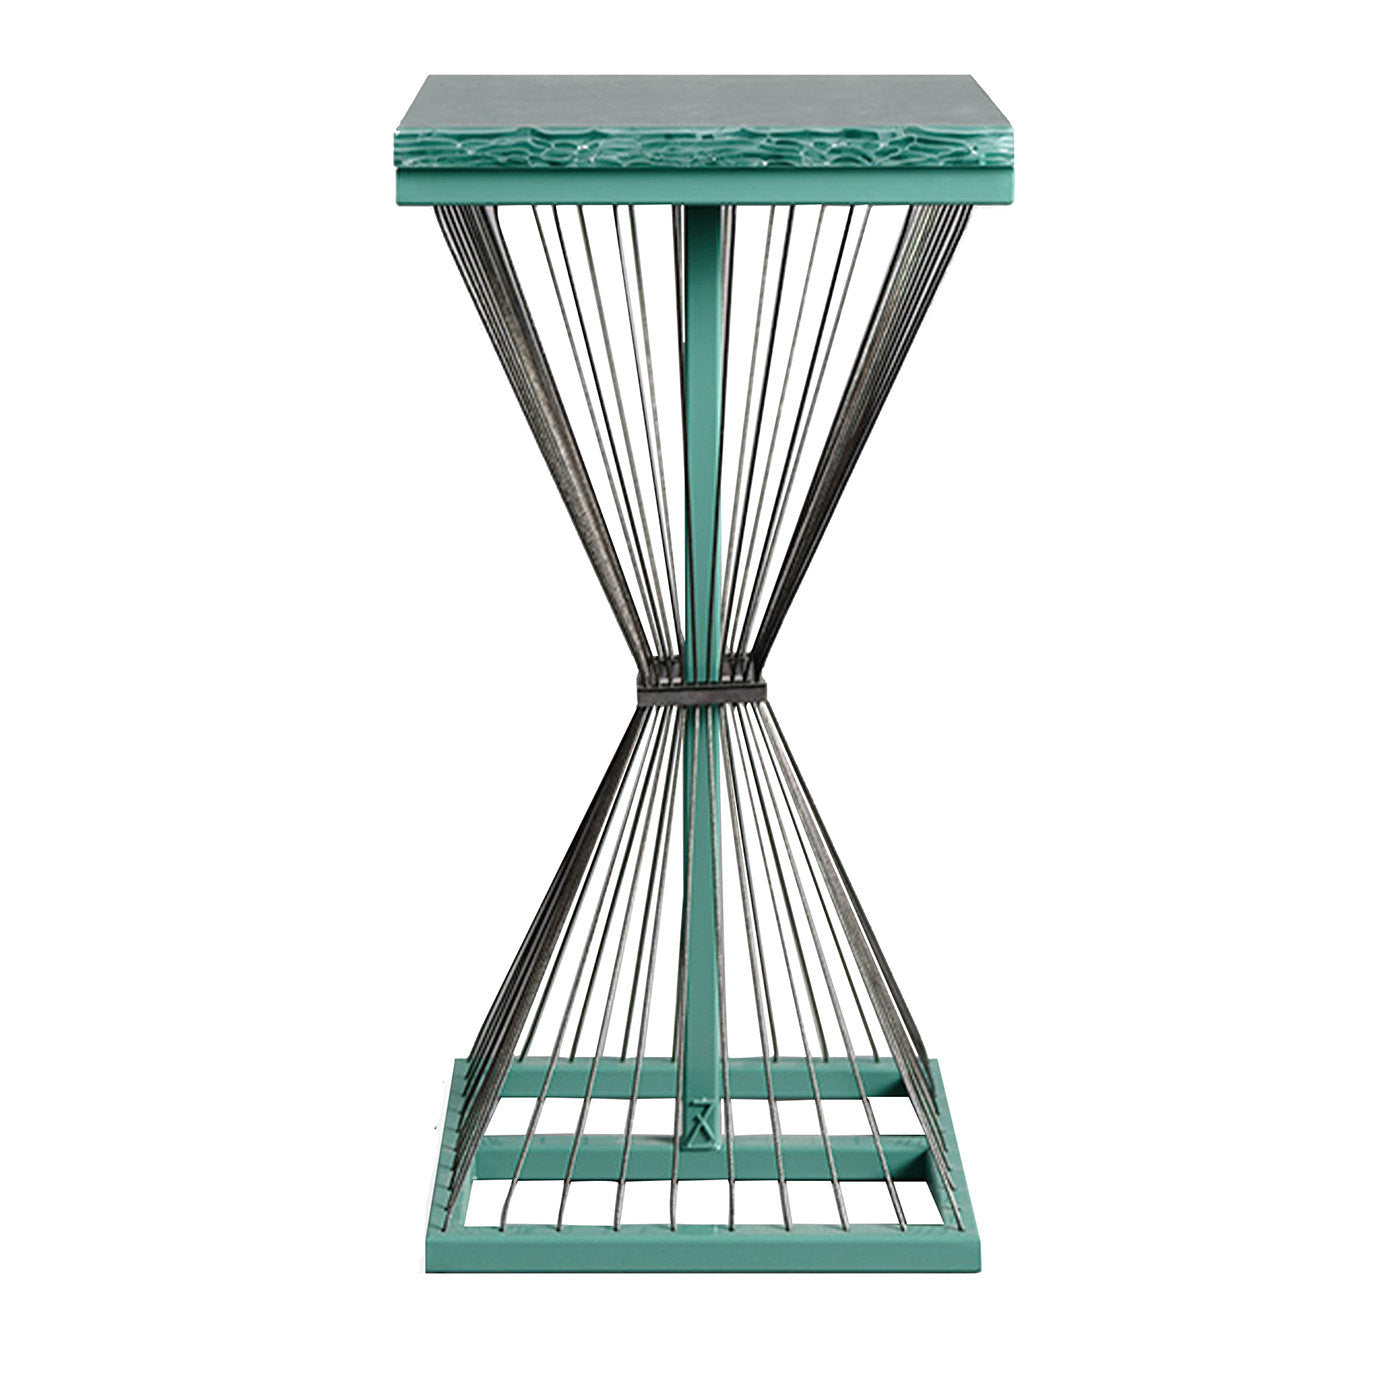 Aegis Square Cocktail Table by Ziad Alonaizy - Main view